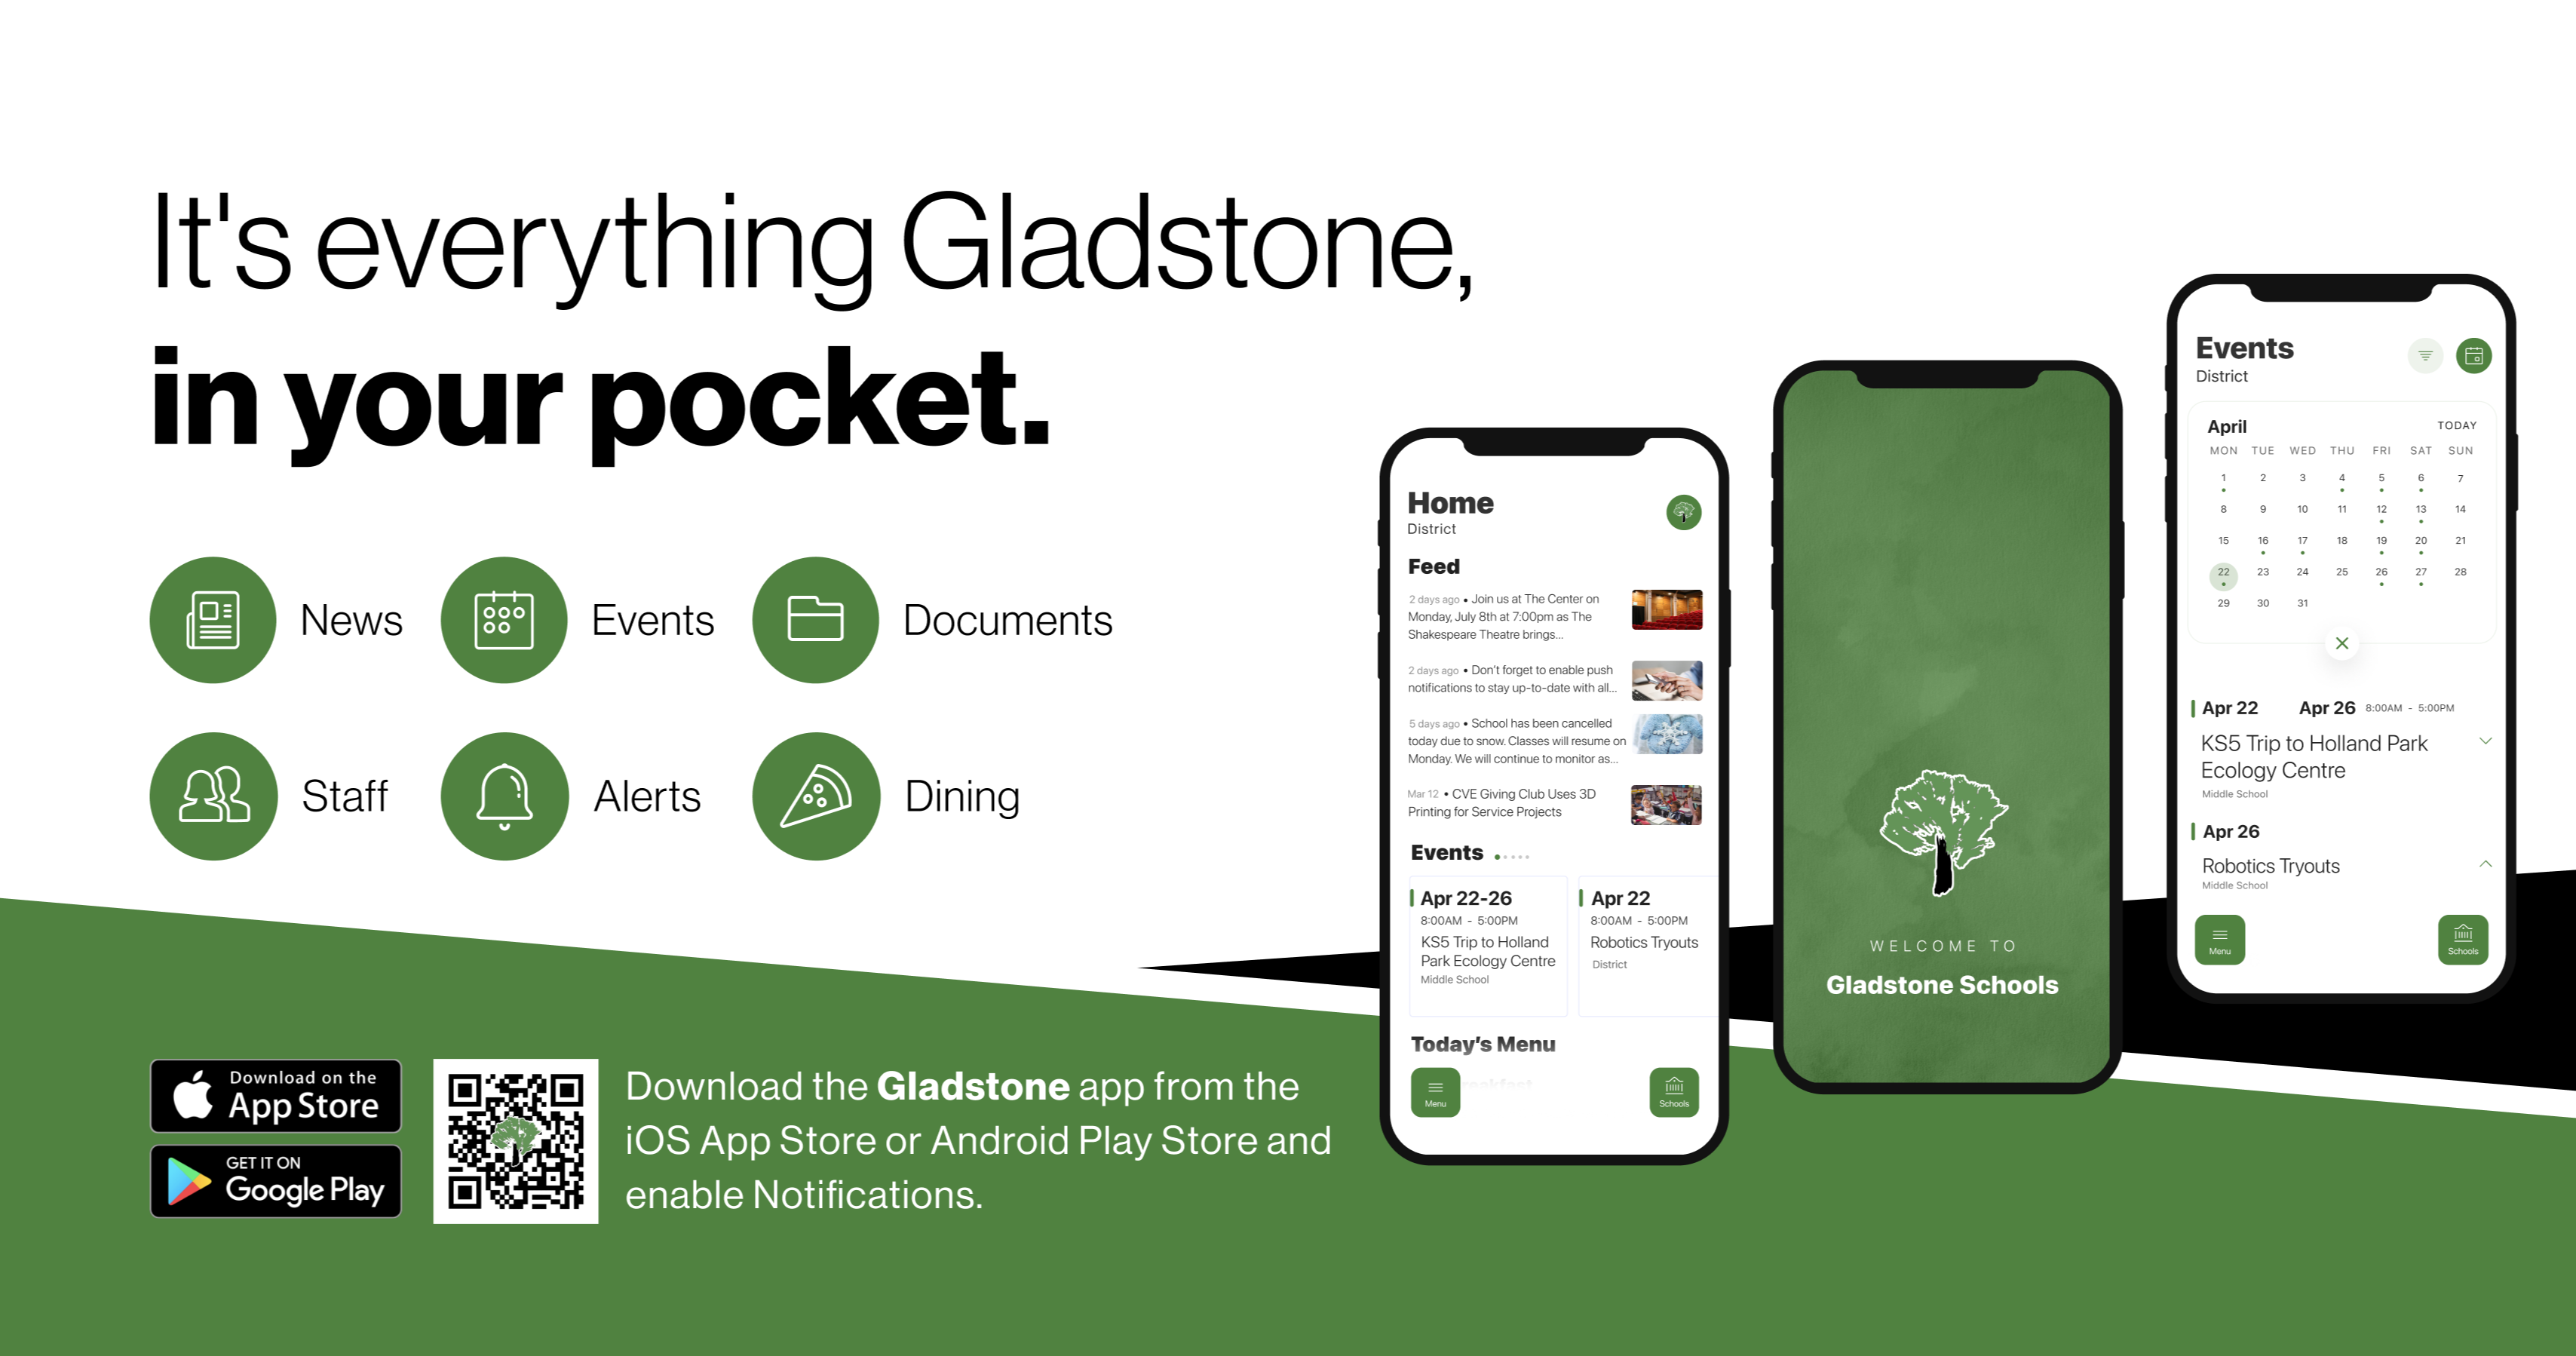 gladstone app flyer with two phones and qr code to download app on app store or google play